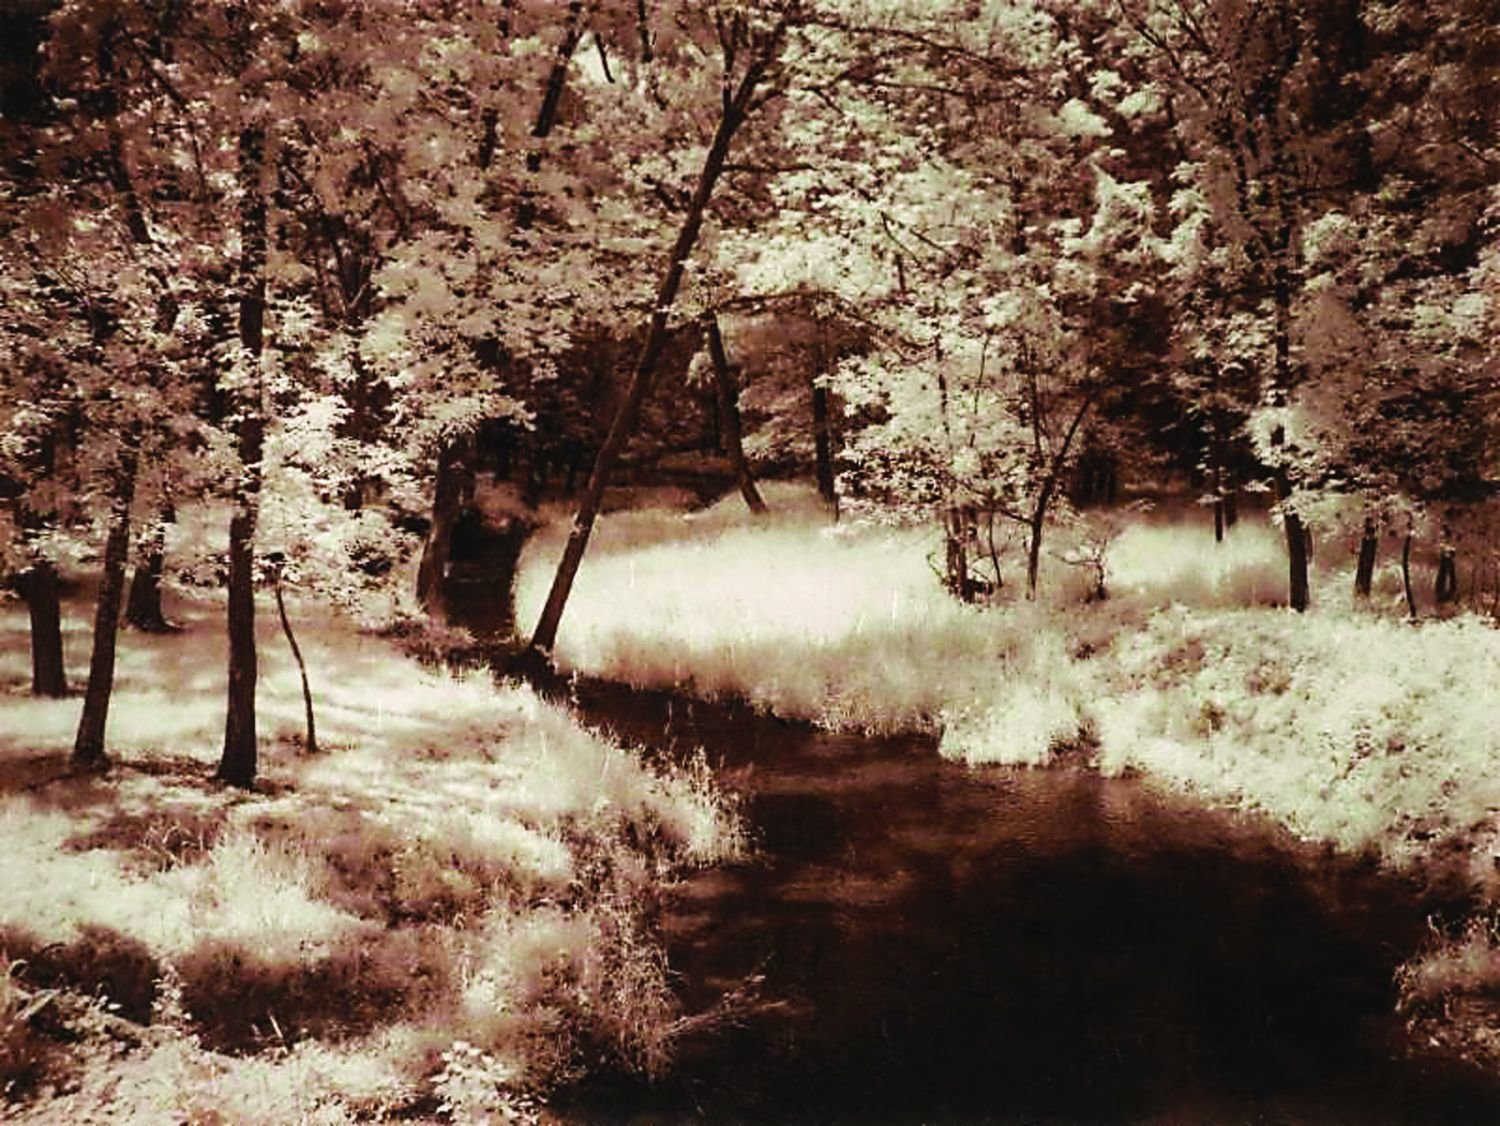 Bucks County landscapes printed on rice paper, by photographer Diane Levell, are featured in a never-before-seen exhibition at the Michener Art Museum.